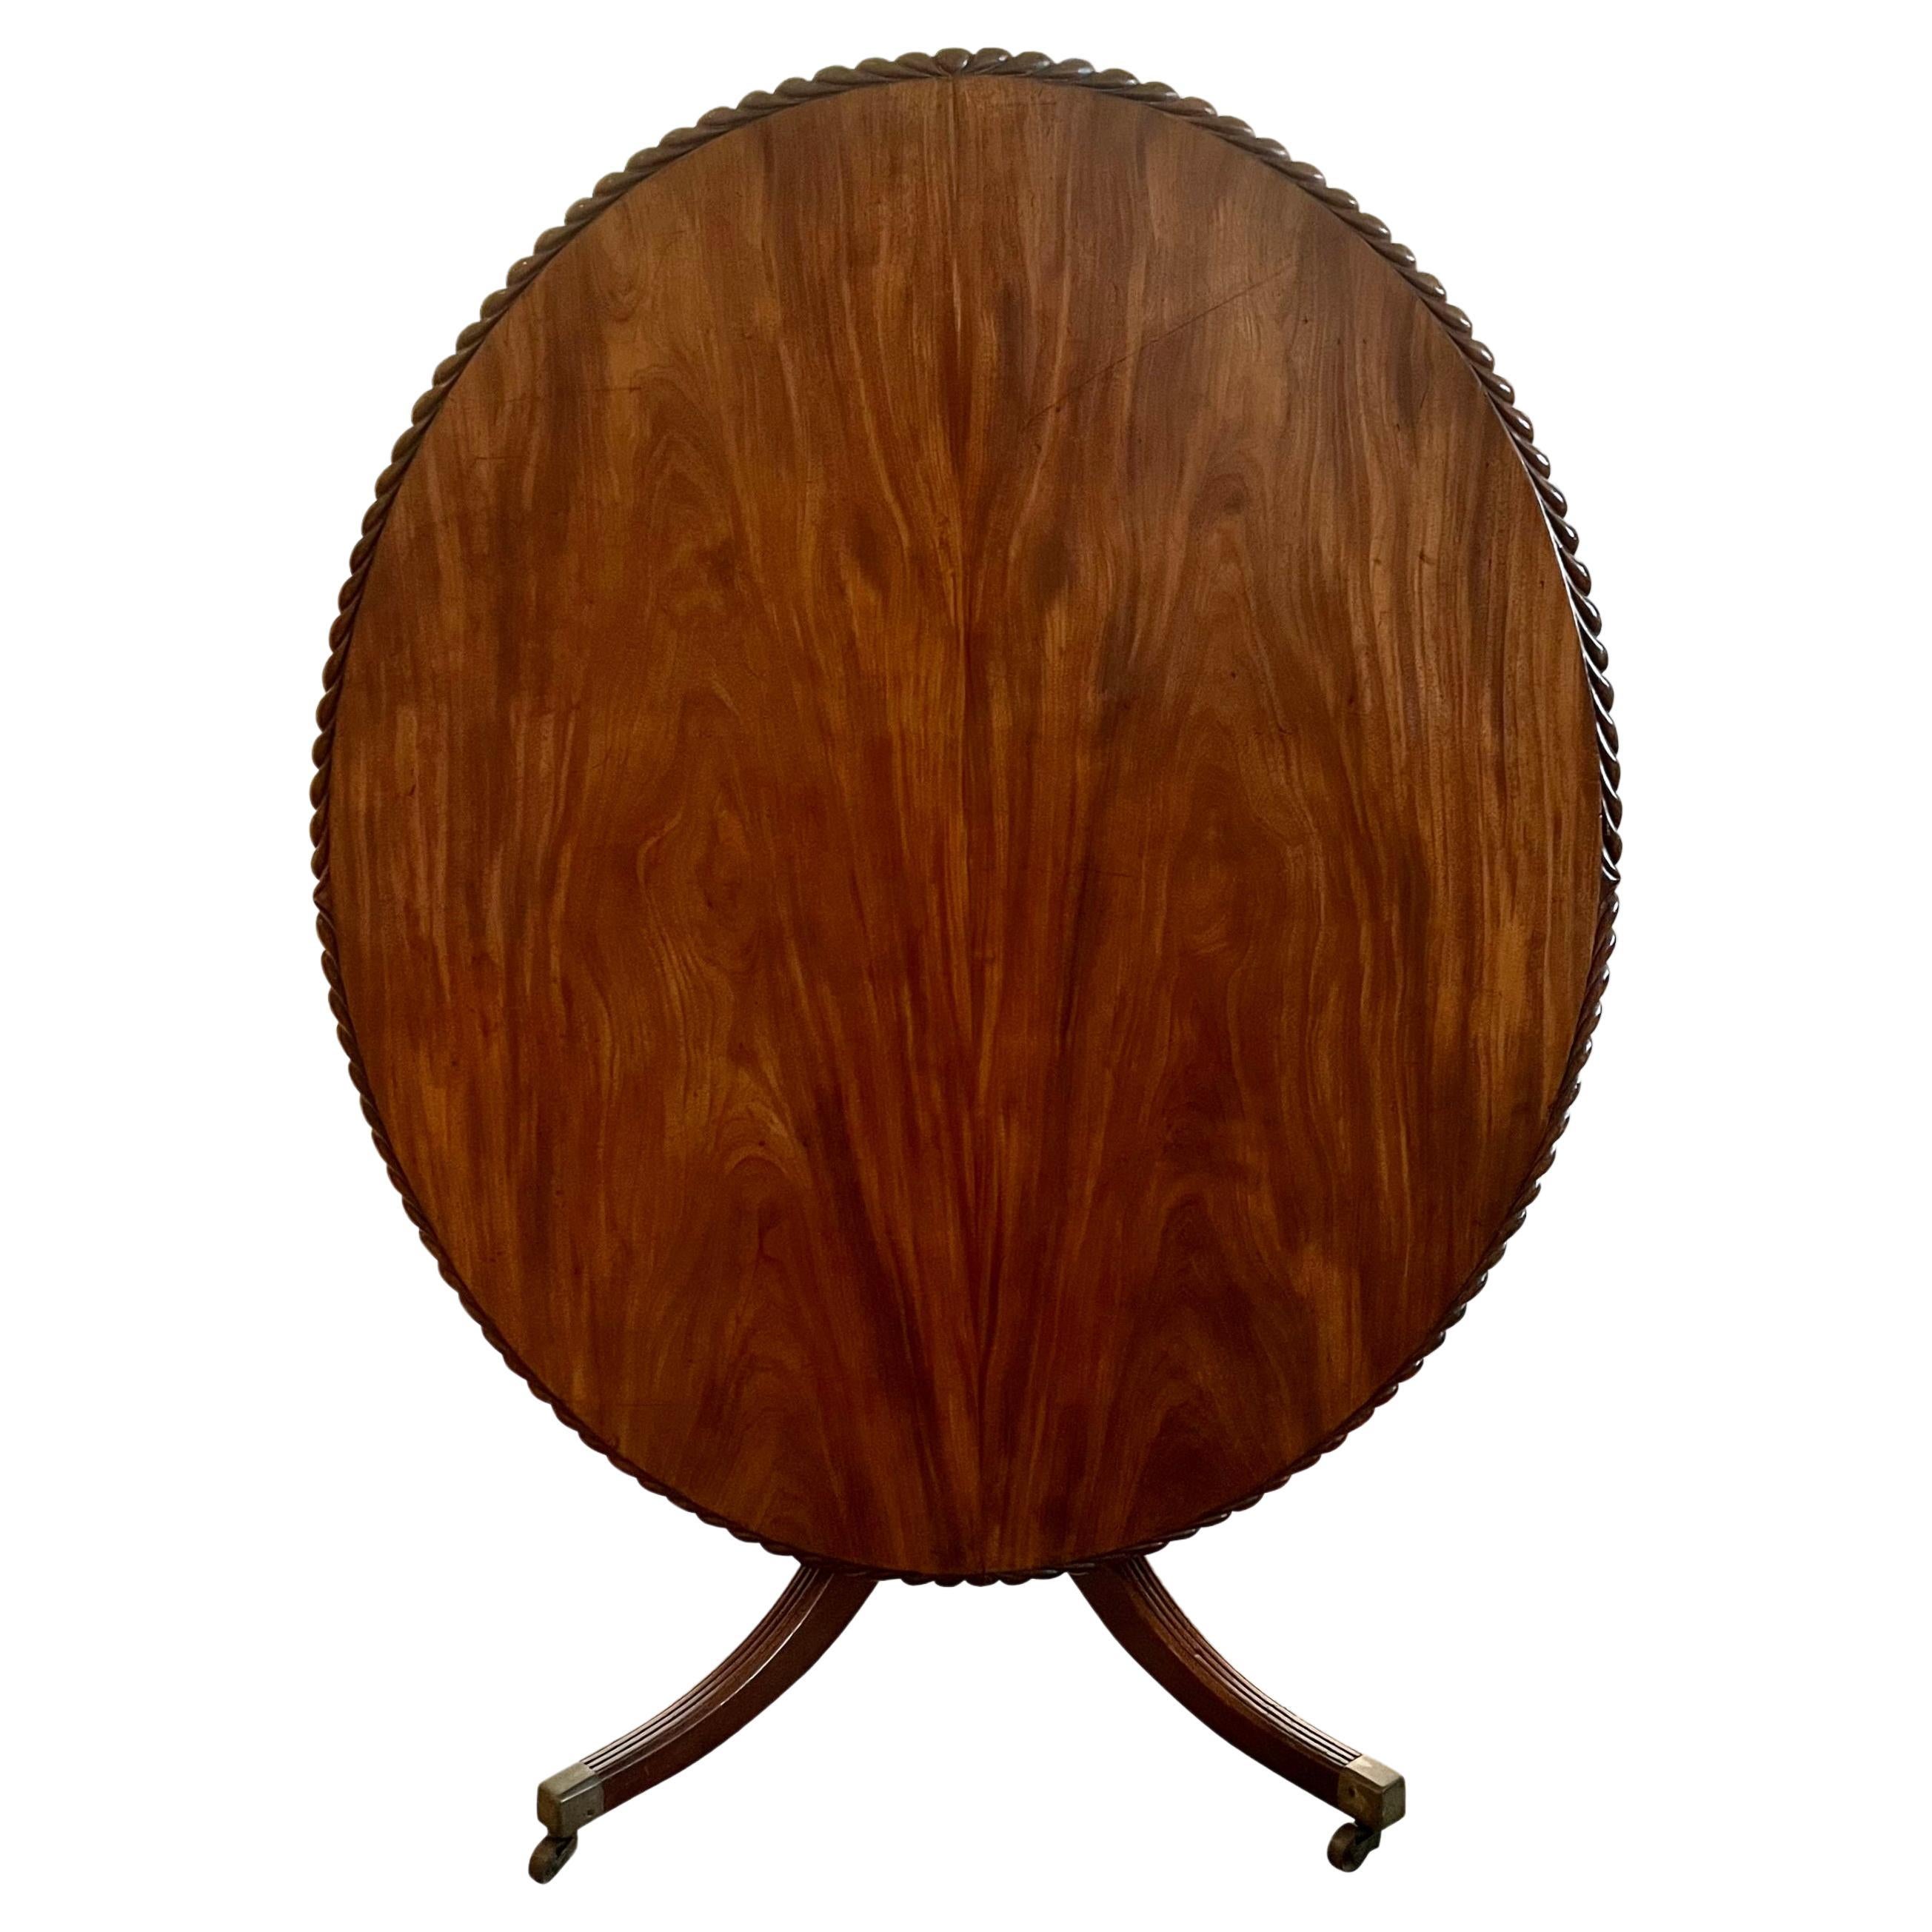 An English late Georgian tilt-top breakfast table, the solid well-figured mahogany top with a bold rope carved edge resting on a quadripartite reeded base ending brass caps on casters. This piece has lovely figuring to the top and a pleasing mellow